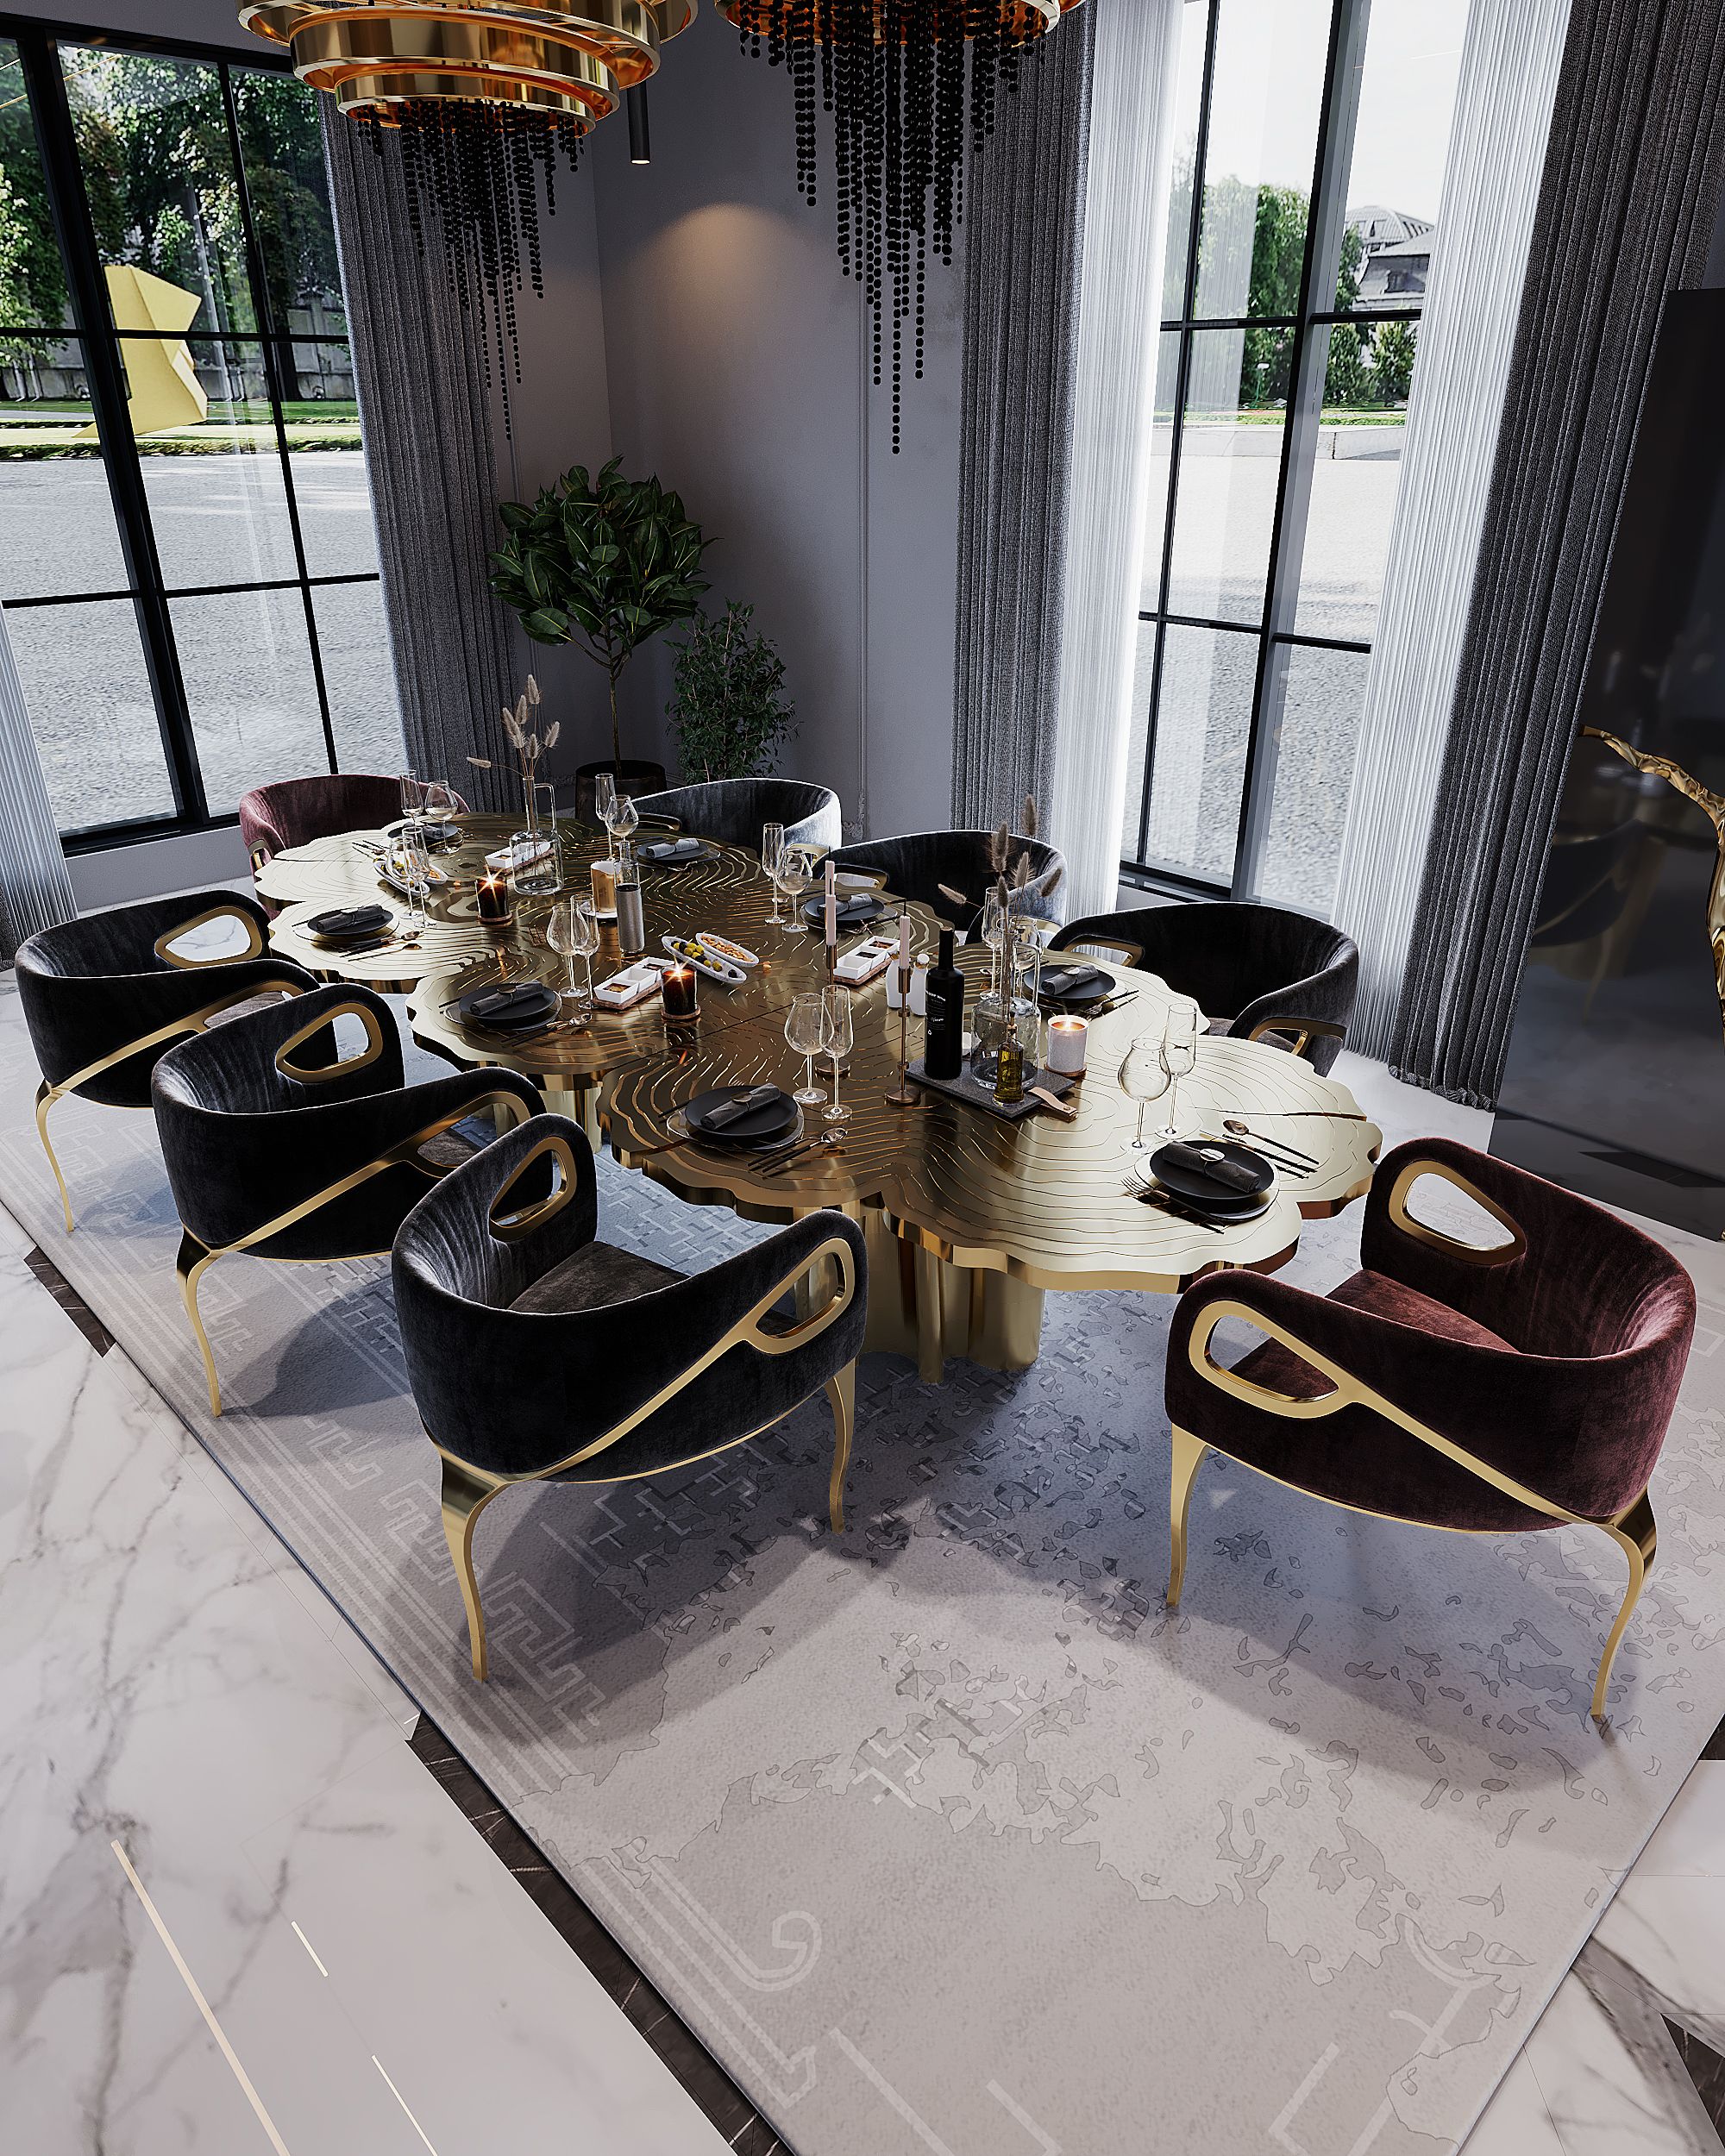 Elegant and luxurious dining room with RUIN RUG in gray colors and golden dining table What Are The Best Modern Hand-Tufted Dining Room Rugs?